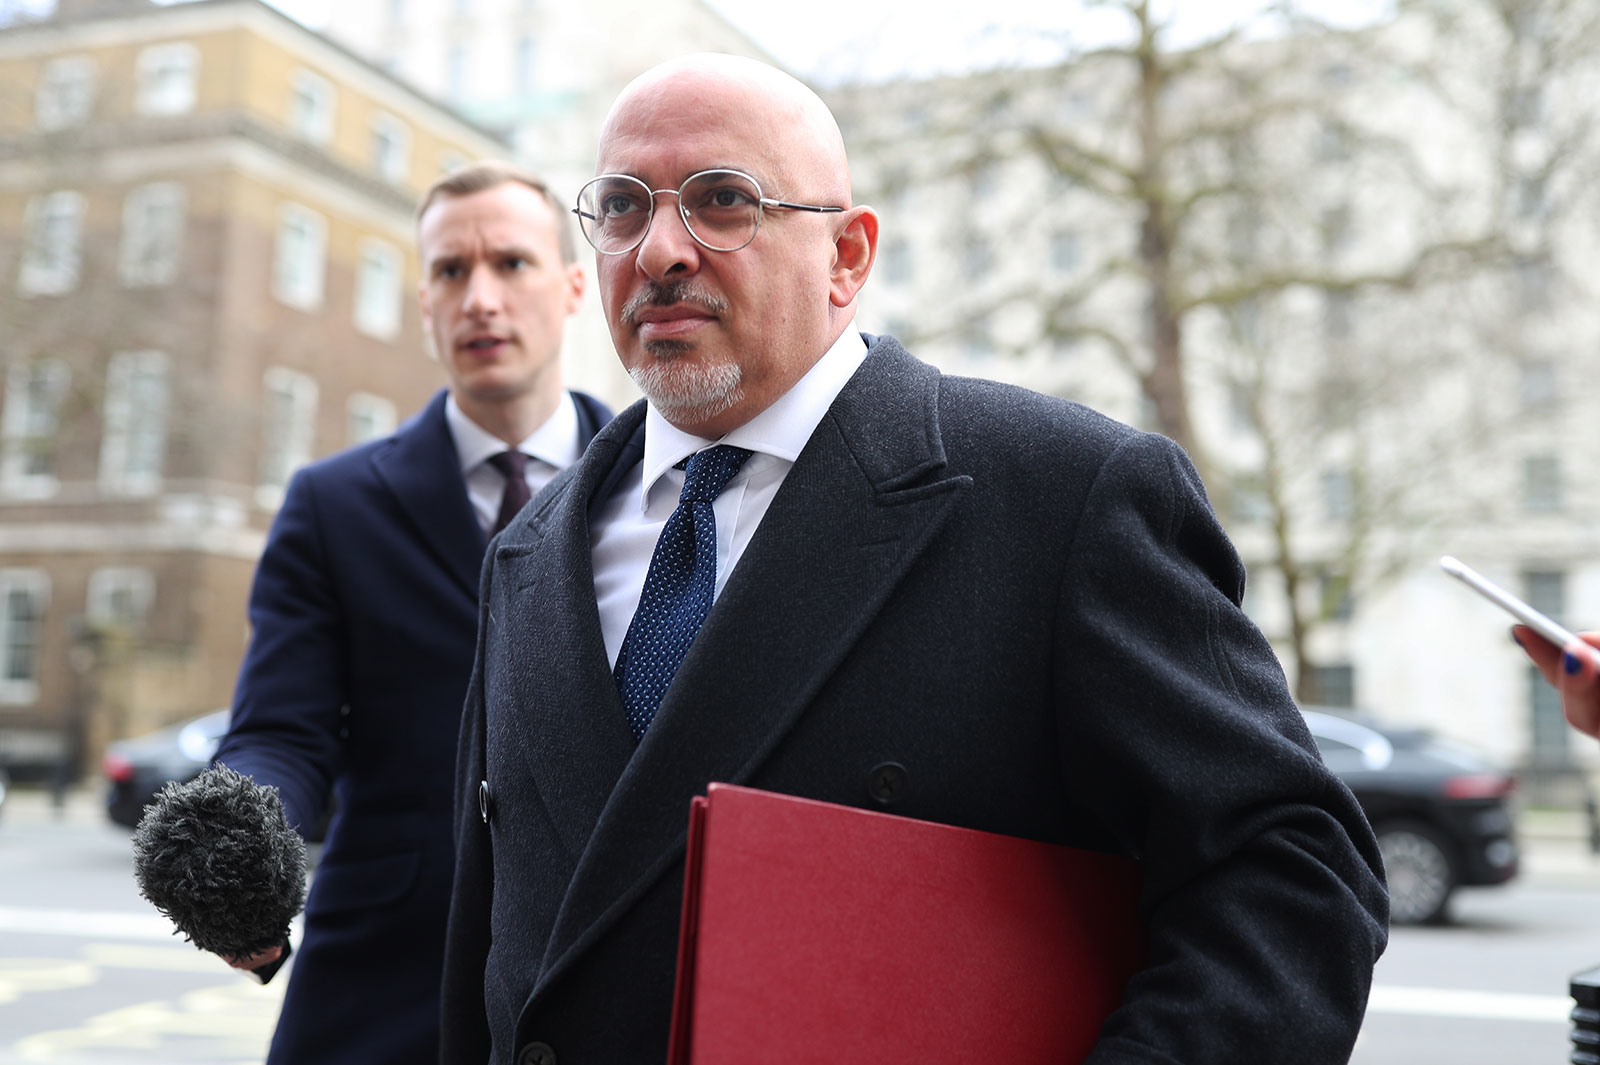 Nadhim Zahawi arrives at the Cabinet Office in London on March 9.